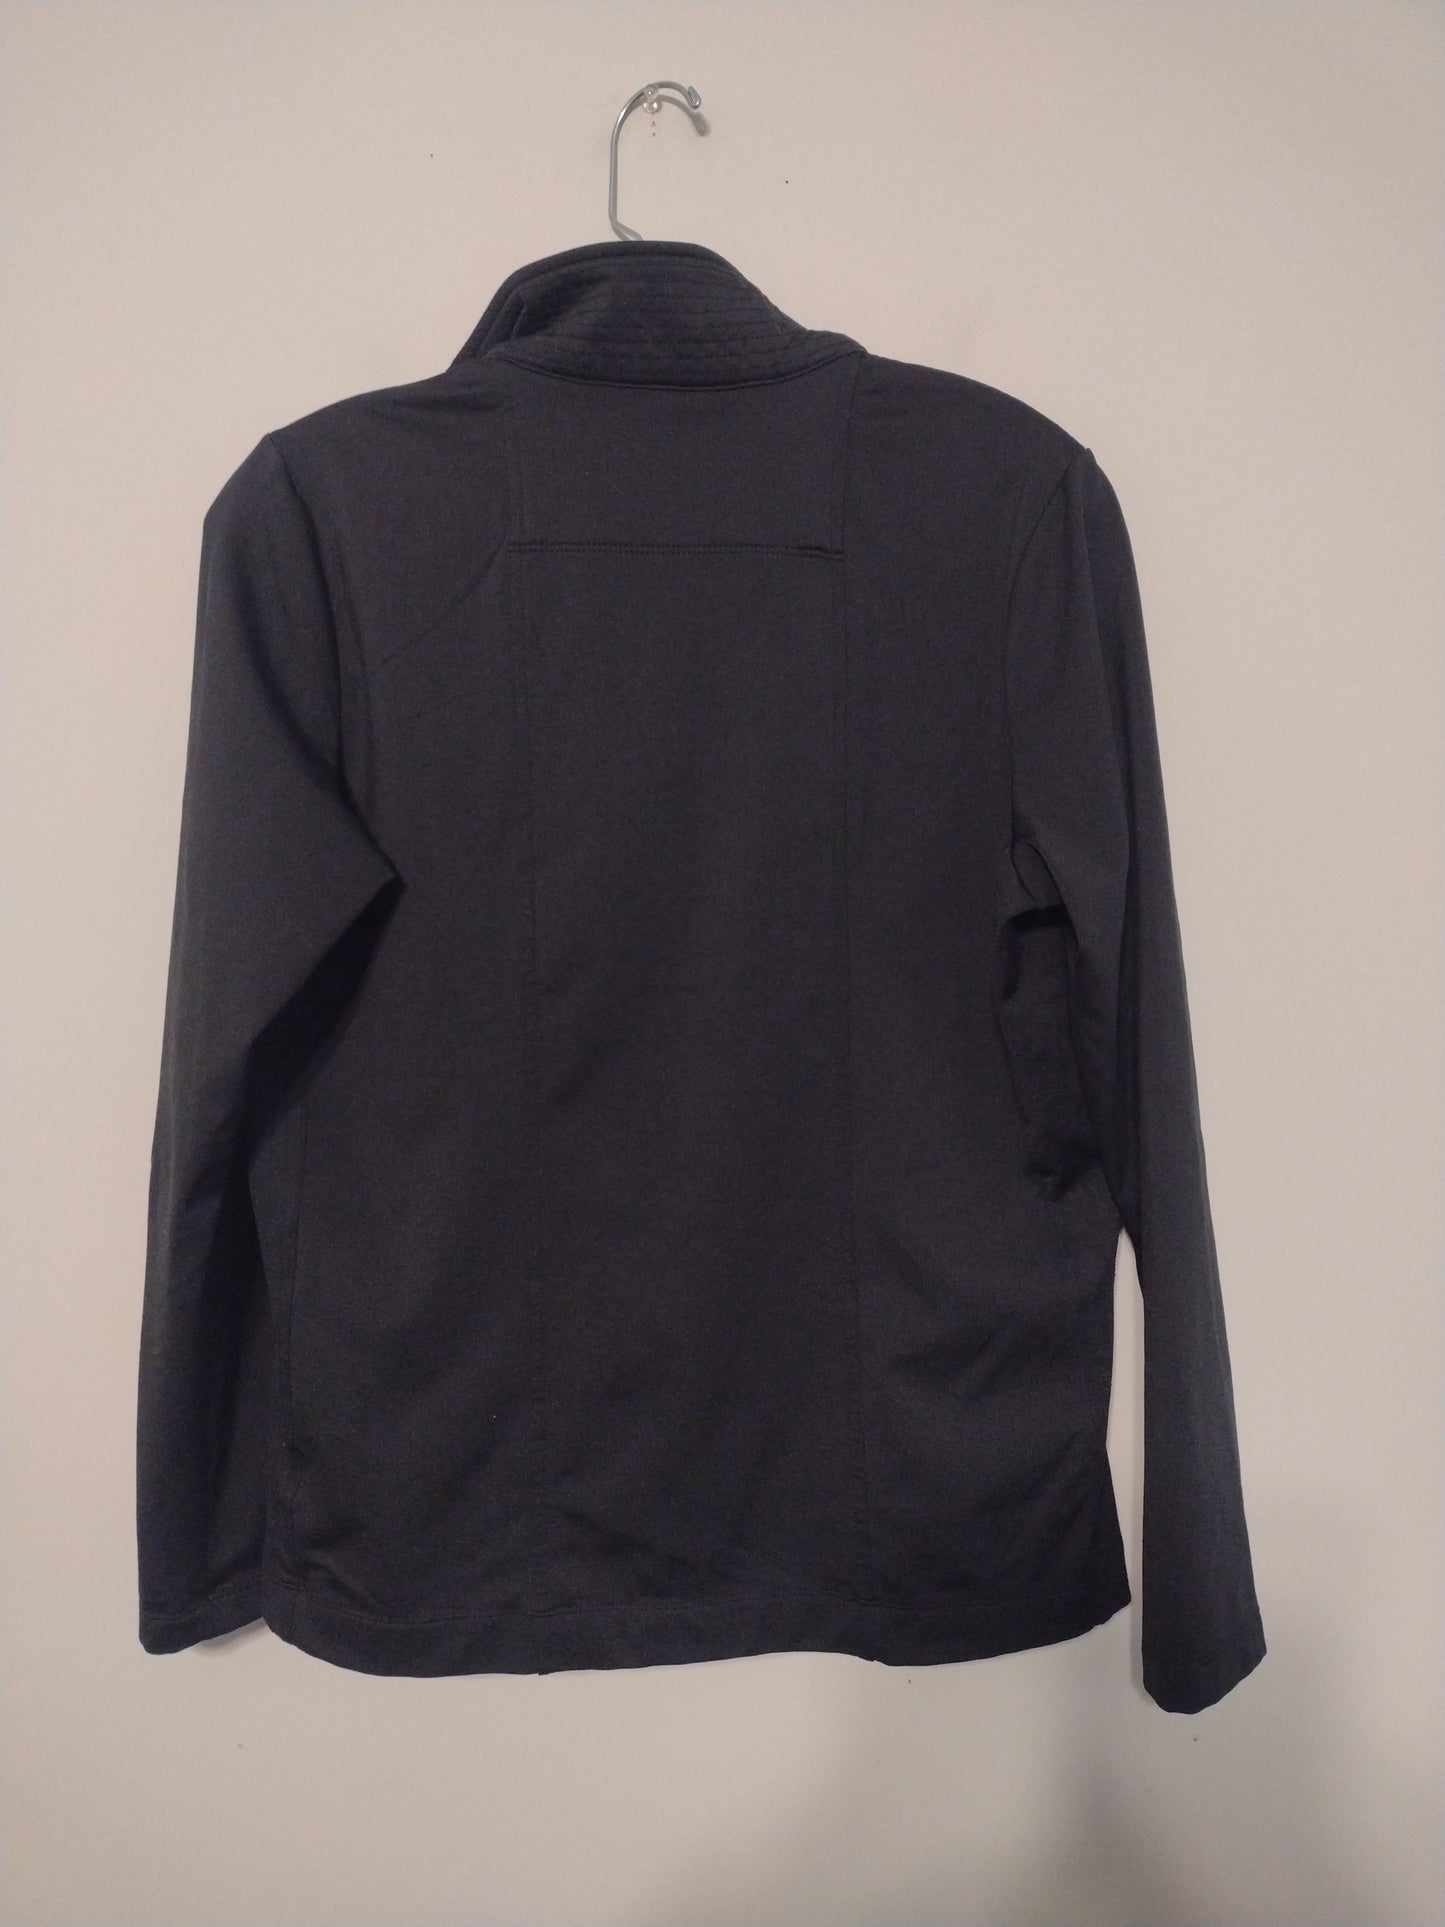 Athletic Jacket By Gym Shark  Size: M